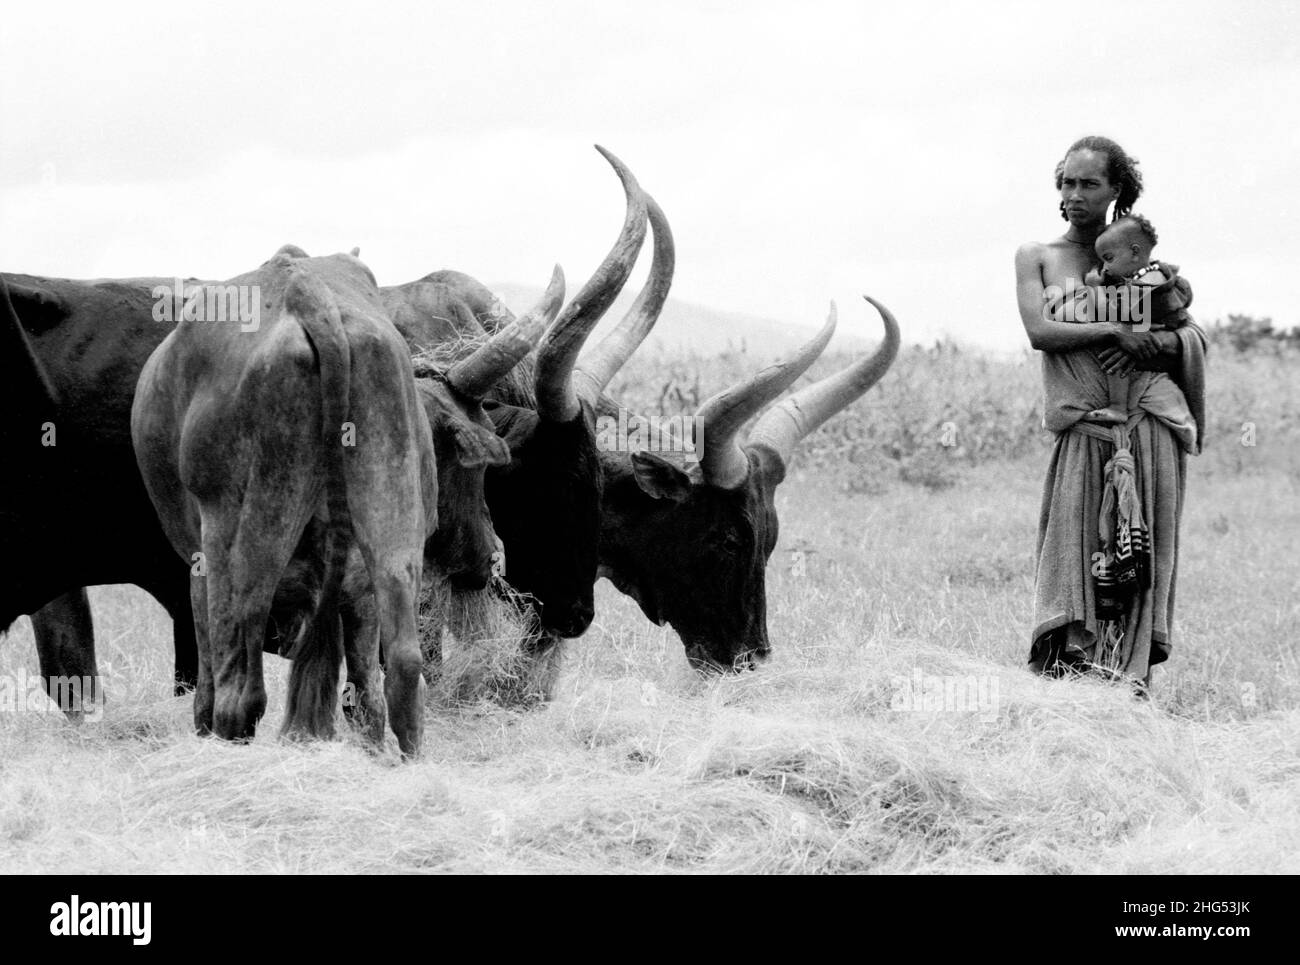 B/W of a traditional rural Tigrayan woman carrying her baby, standing next to Raya, long-horned cattle. Tigray, Ethiopia, Africa Stock Photo